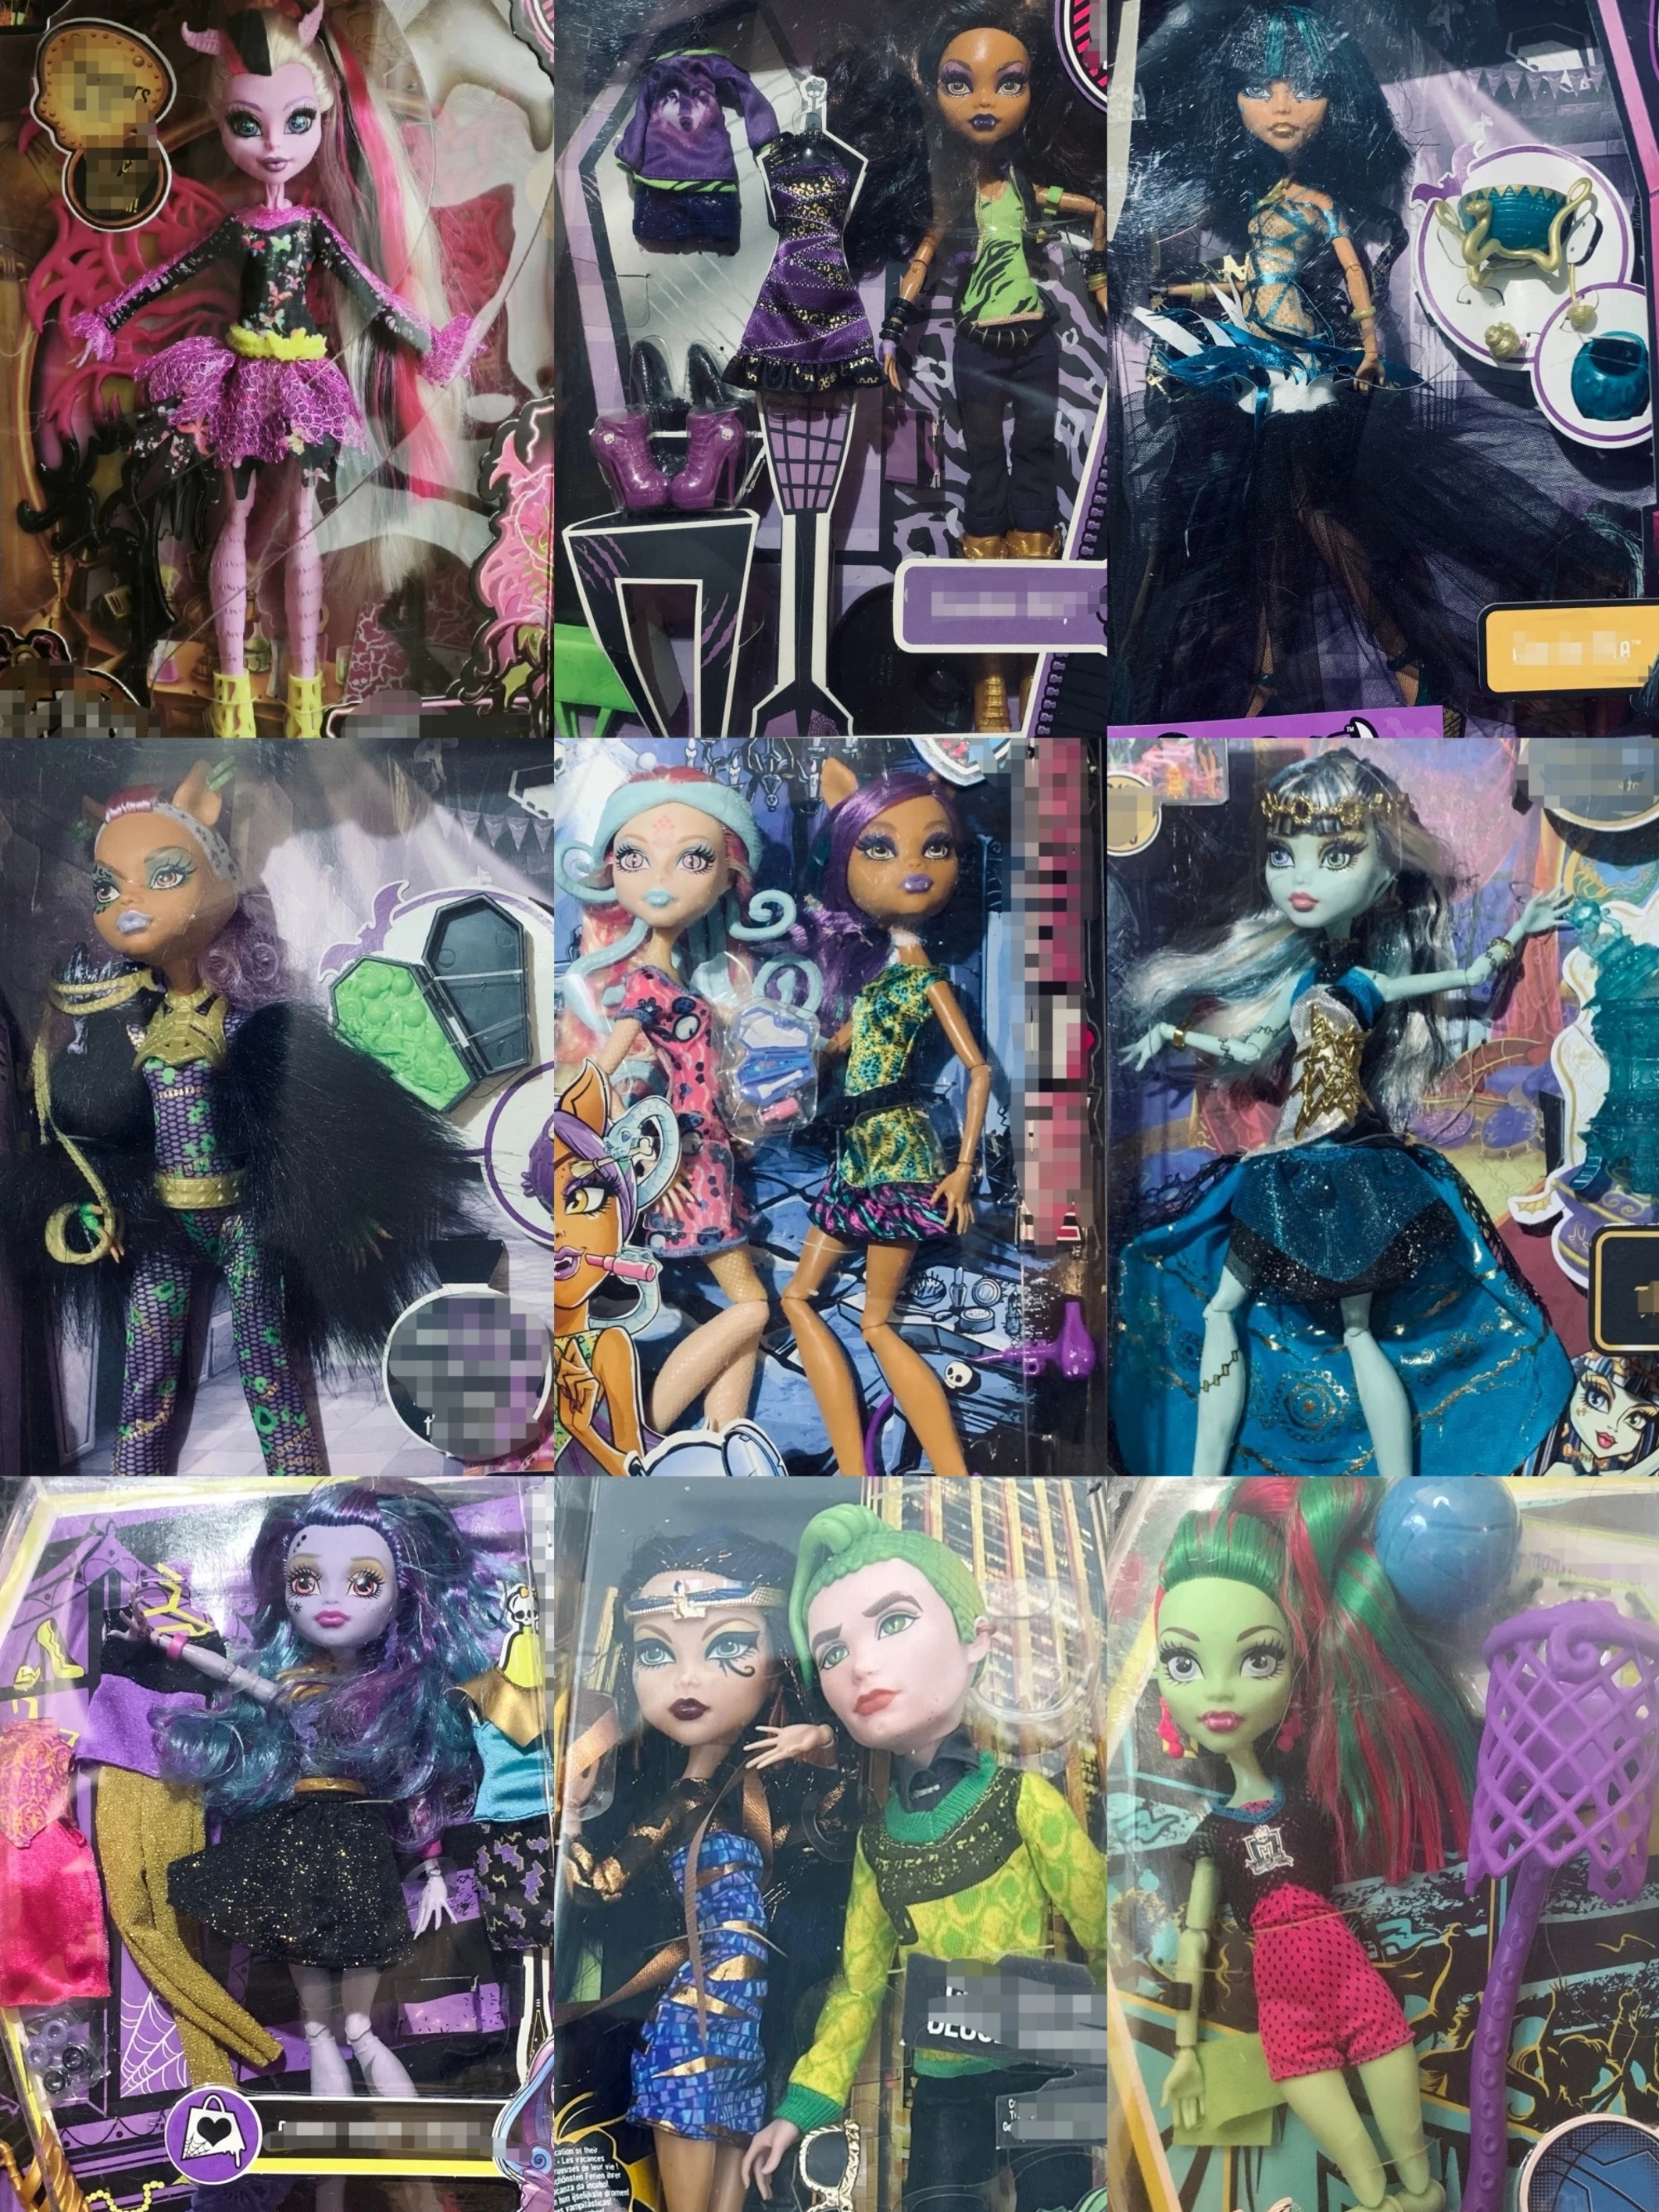 New Surprise Doll Monster High DOLL G3 Ghoulia Yelps Doll with Blue Hair  Pet and Accessories Girls Holiday Gift - AliExpress